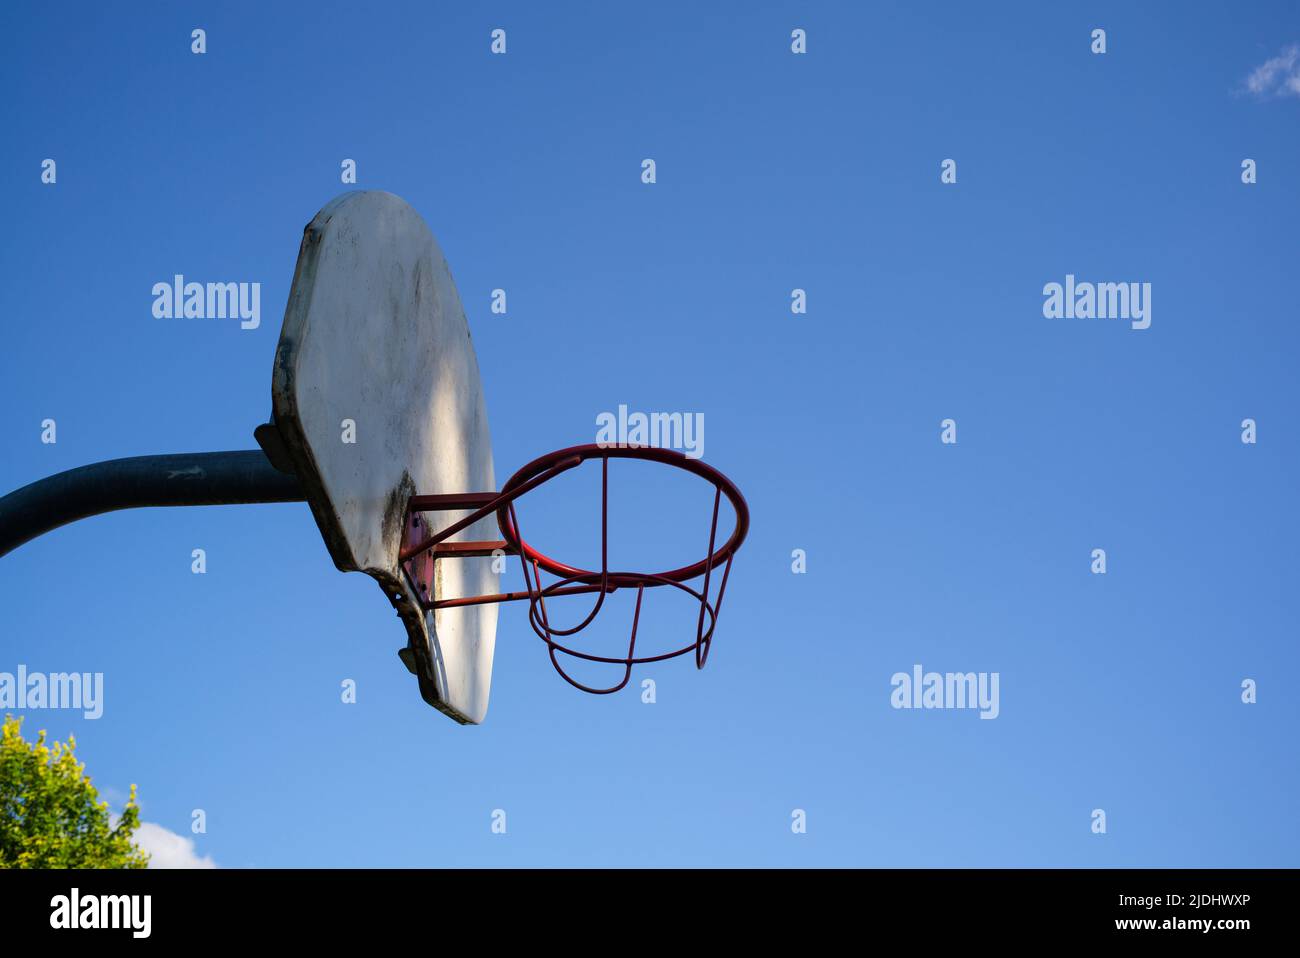 Metal basketball hoop and board against a cloudless strong blue sky with copy space. lit with dappled sunlight. Stock Photo